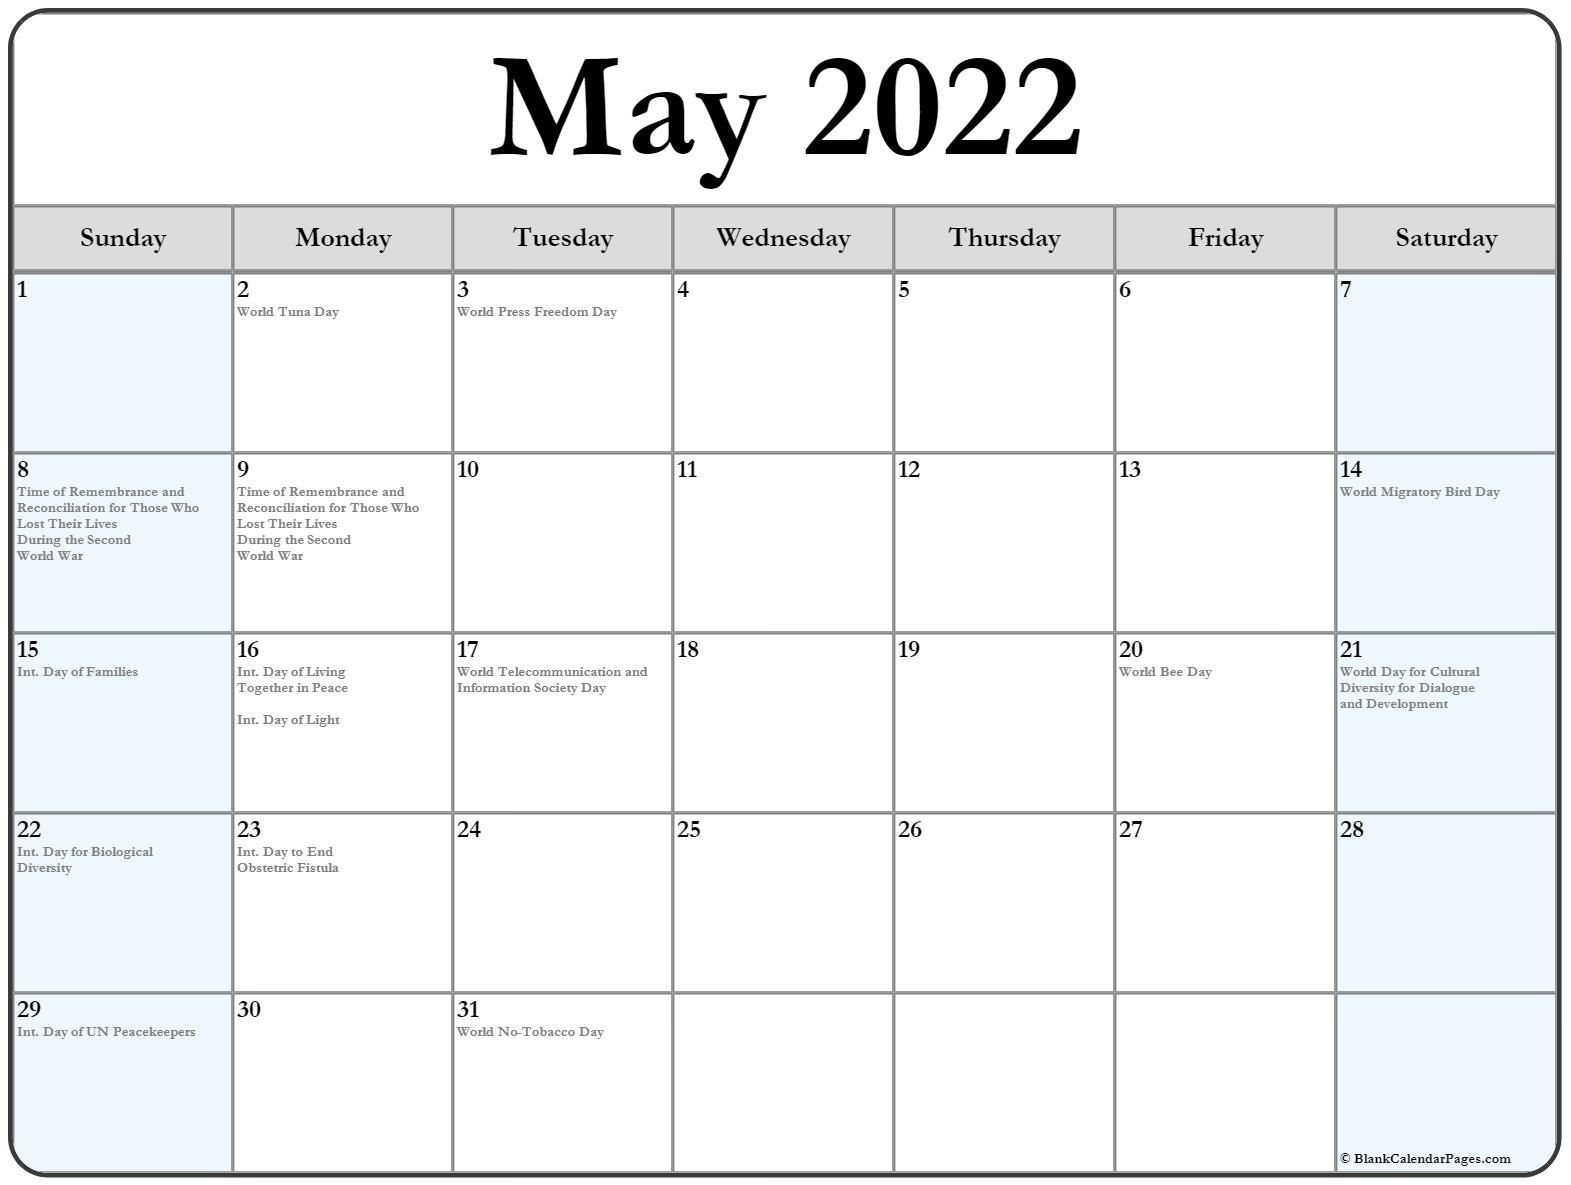 May 2022 Calendar With Holidays